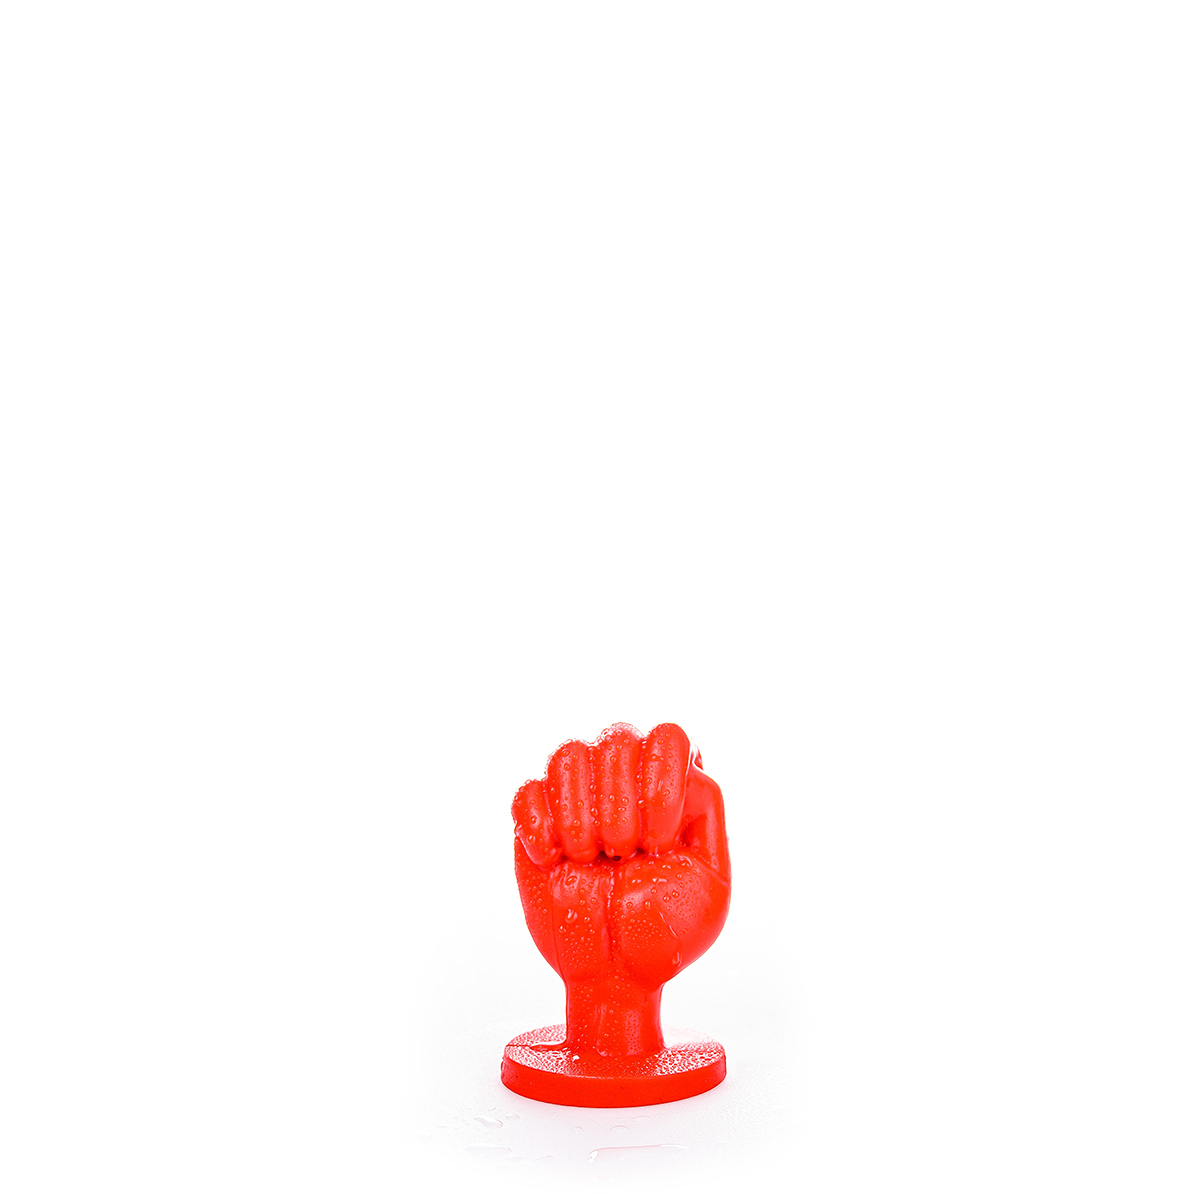 All-Red-Fist-Small-ABR92-115-ABR92-8